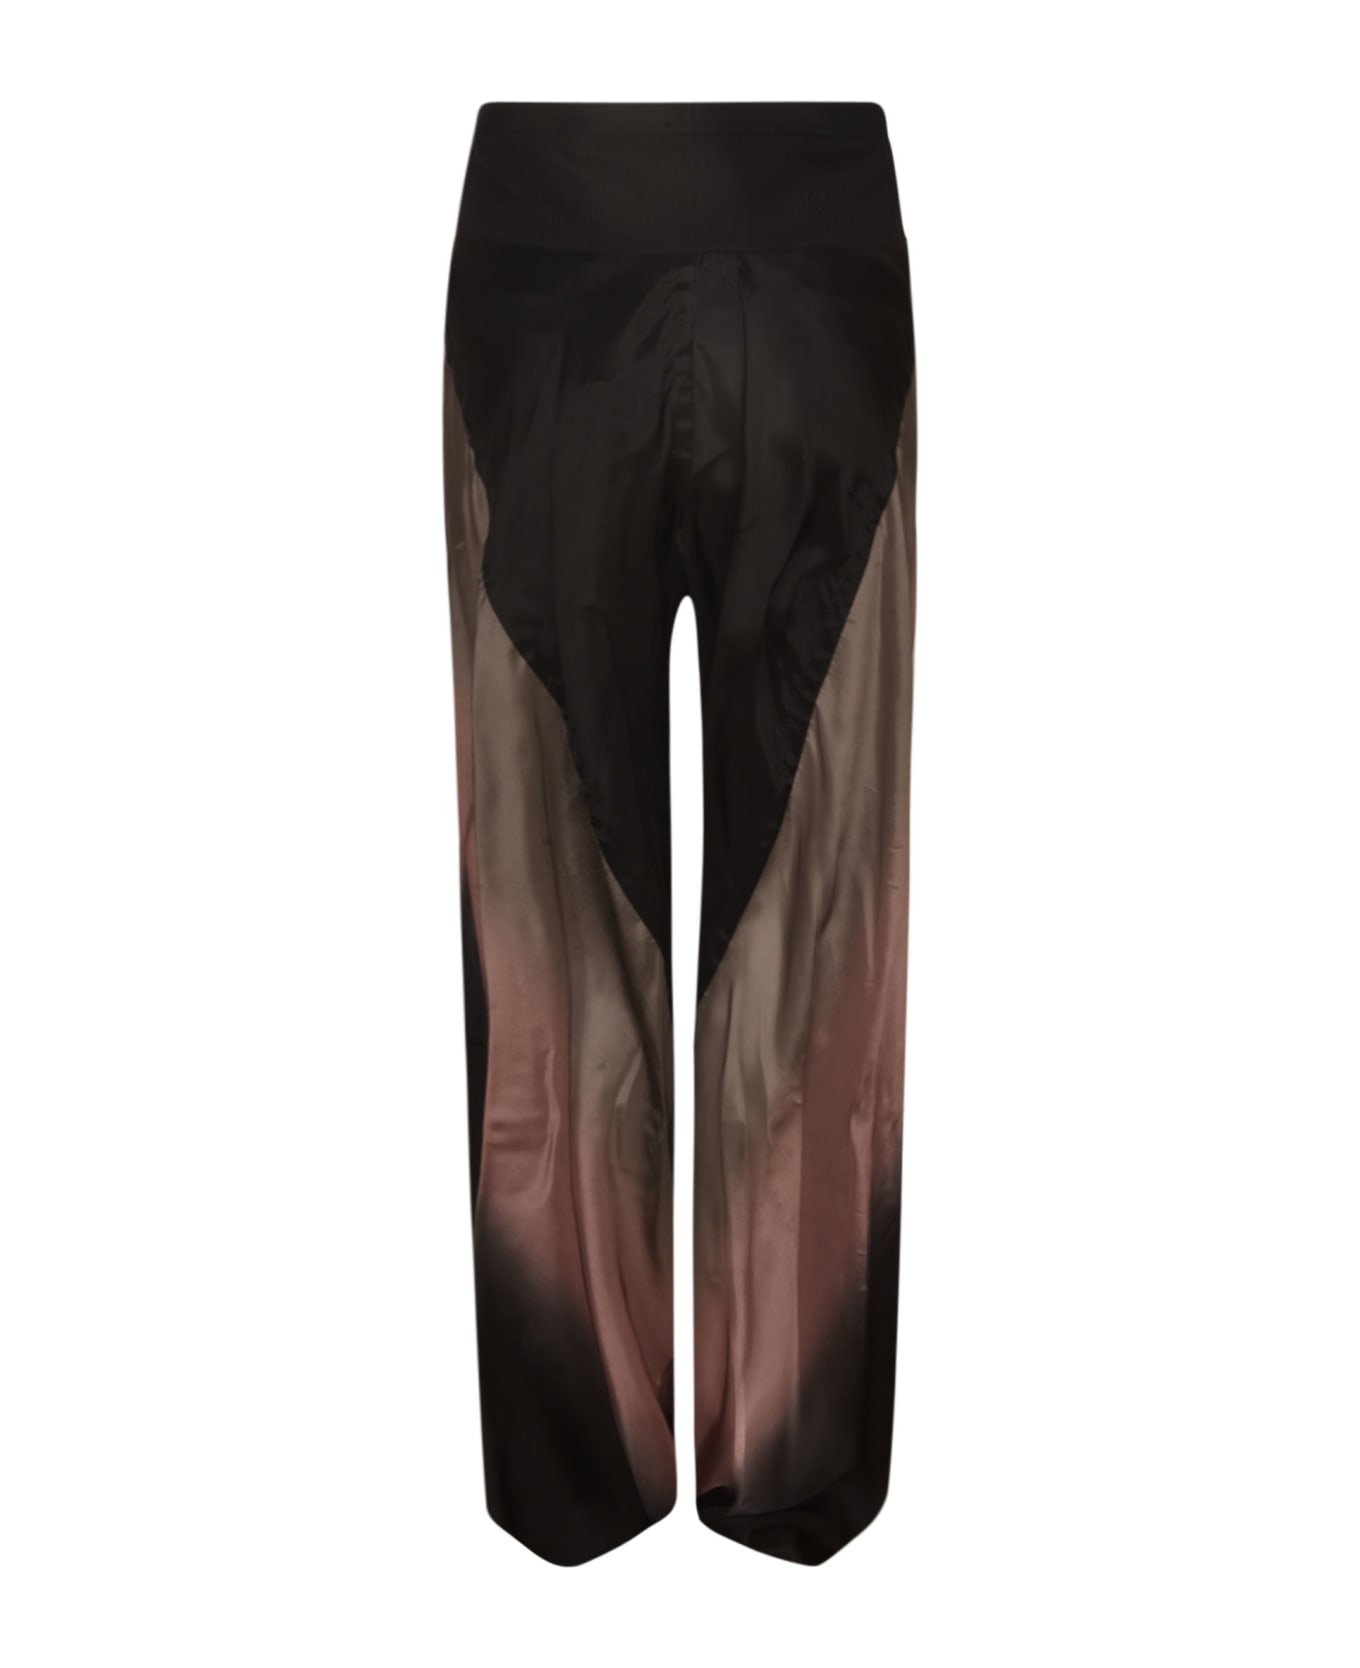 Rick Owens High-waist Patterned Palazzo Pants - Multicolor